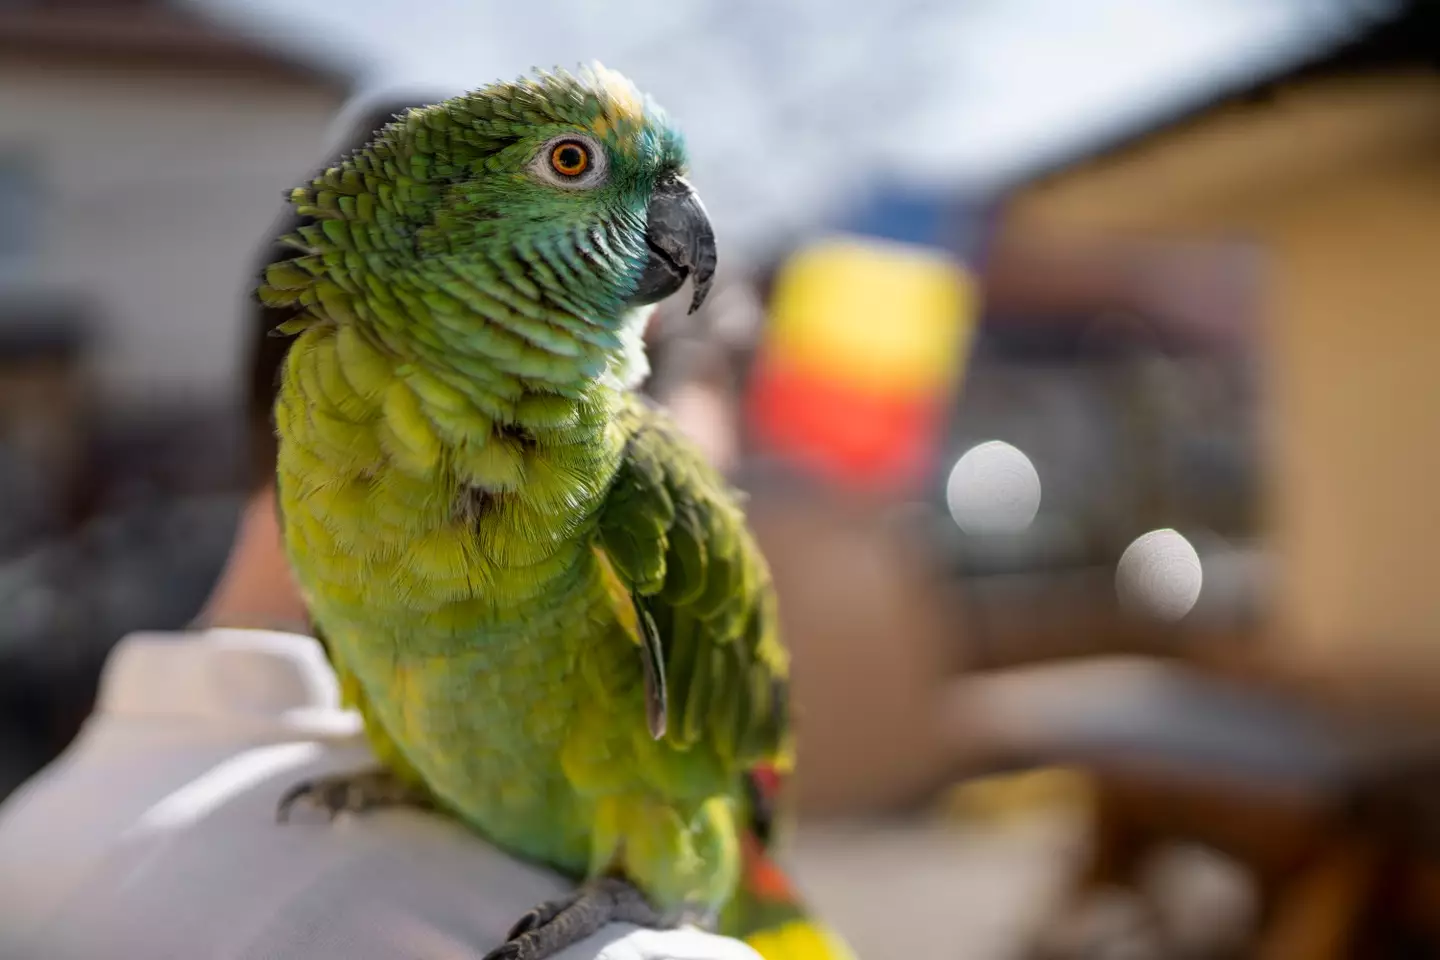 Ben says parrots need lots of space and stimulation.